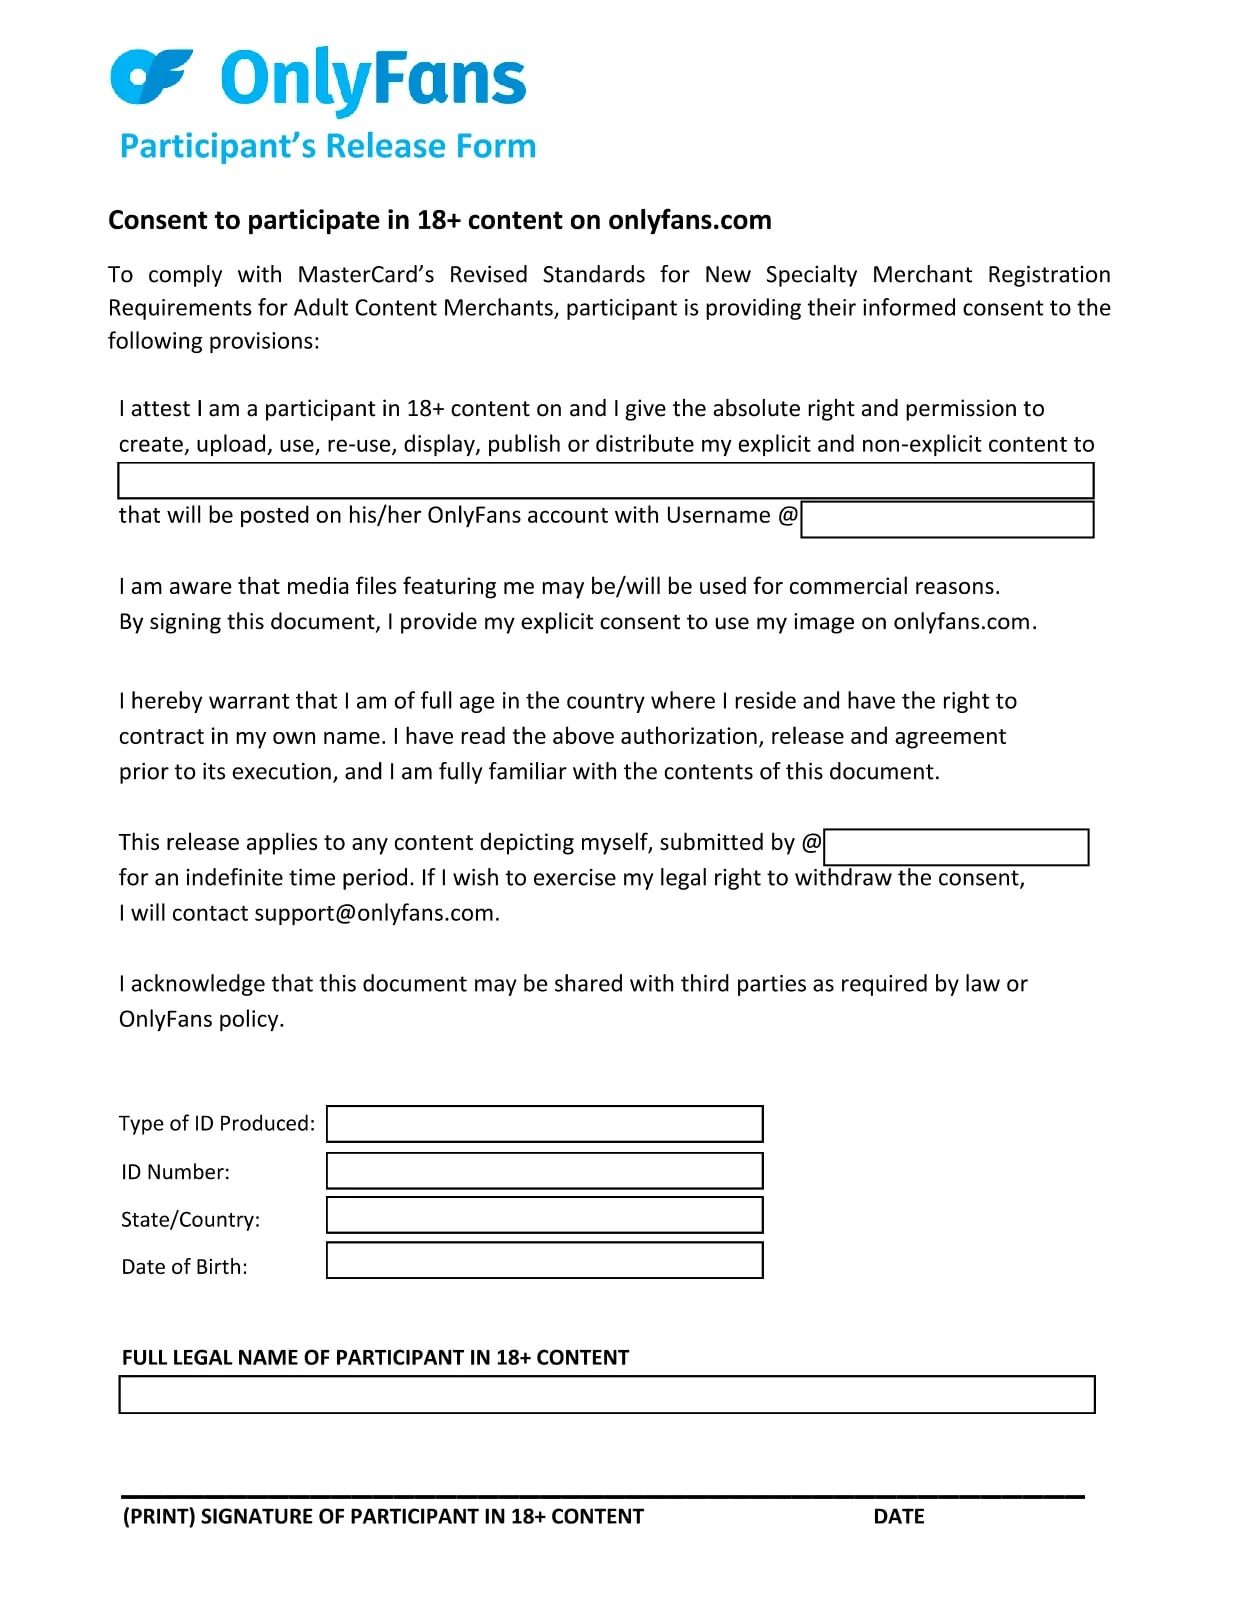 OnlyFans Release Form Document